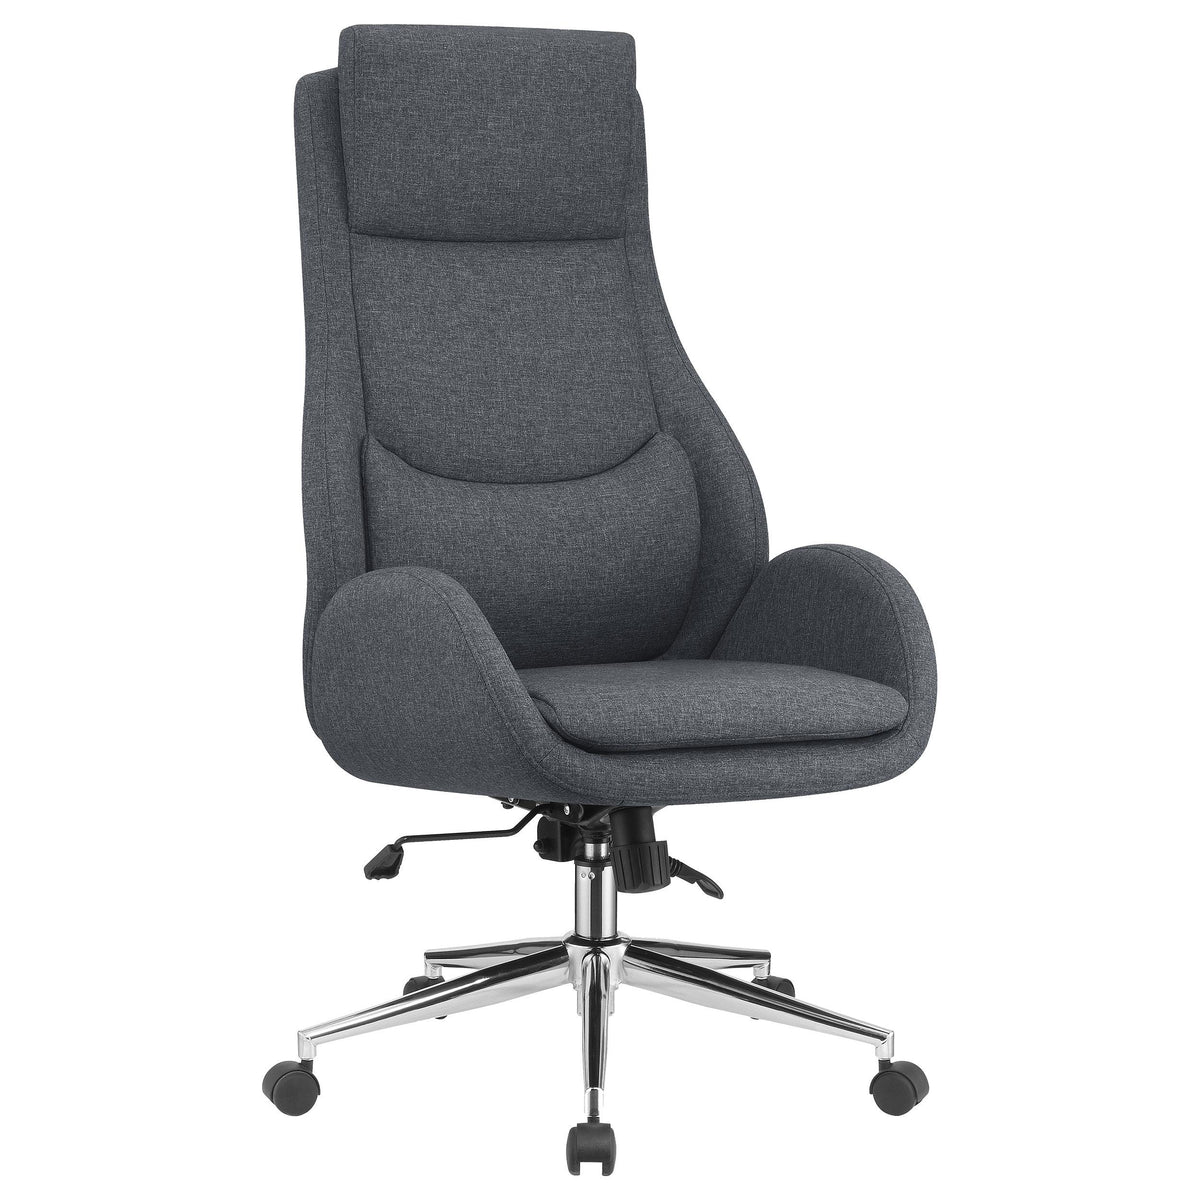 Cruz Upholstered Office Chair with Padded Seat Grey and Chrome Cruz Upholstered Office Chair with Padded Seat Grey and Chrome Half Price Furniture